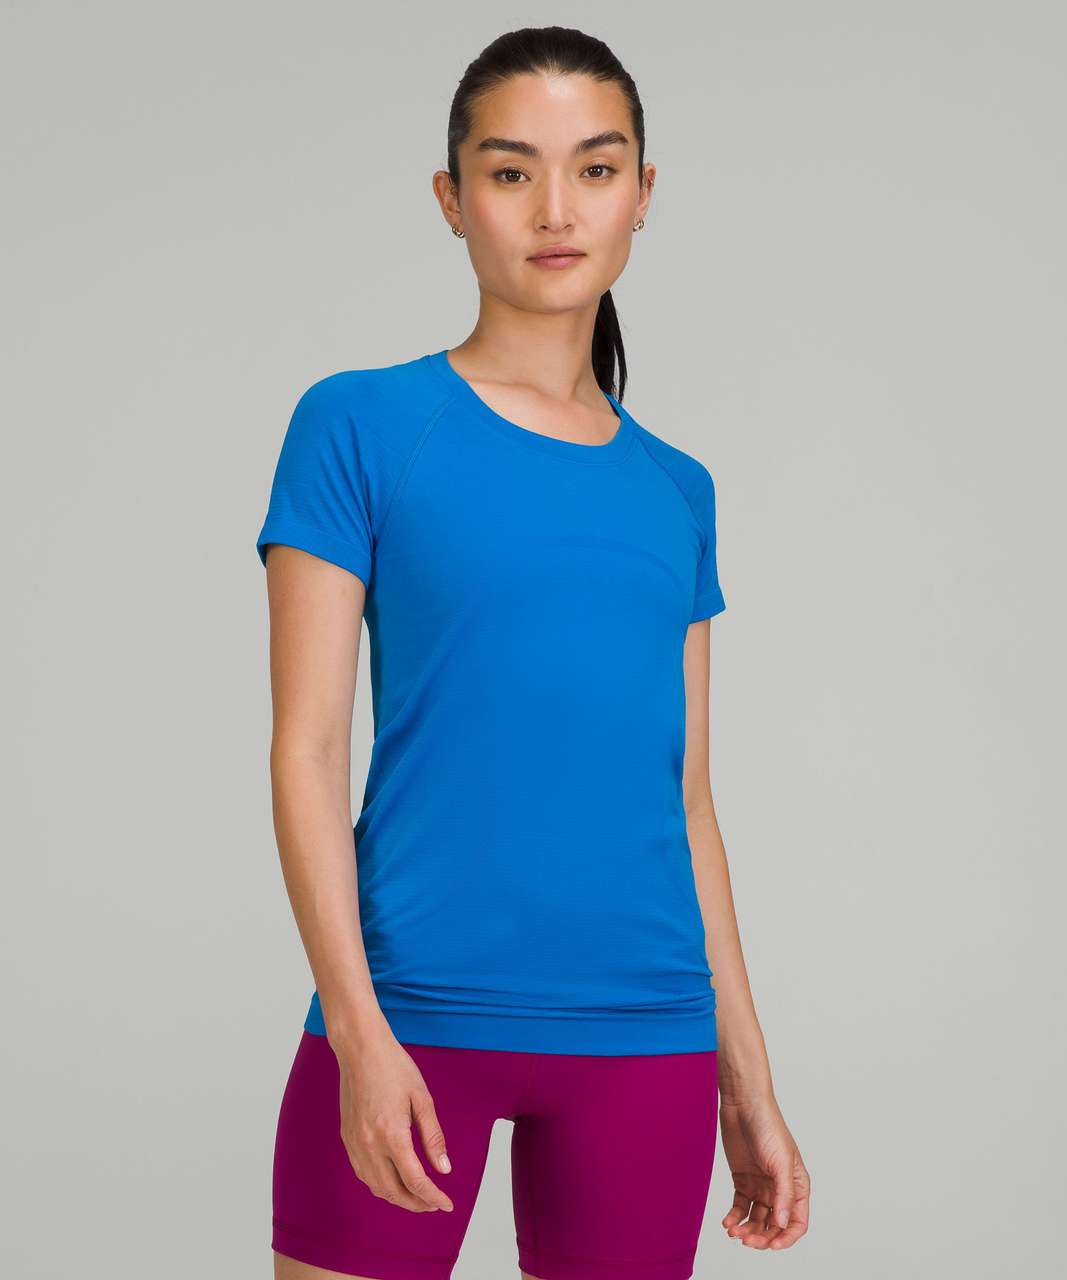 My go to workout top is this lululemon inspired swiftly tech shirt